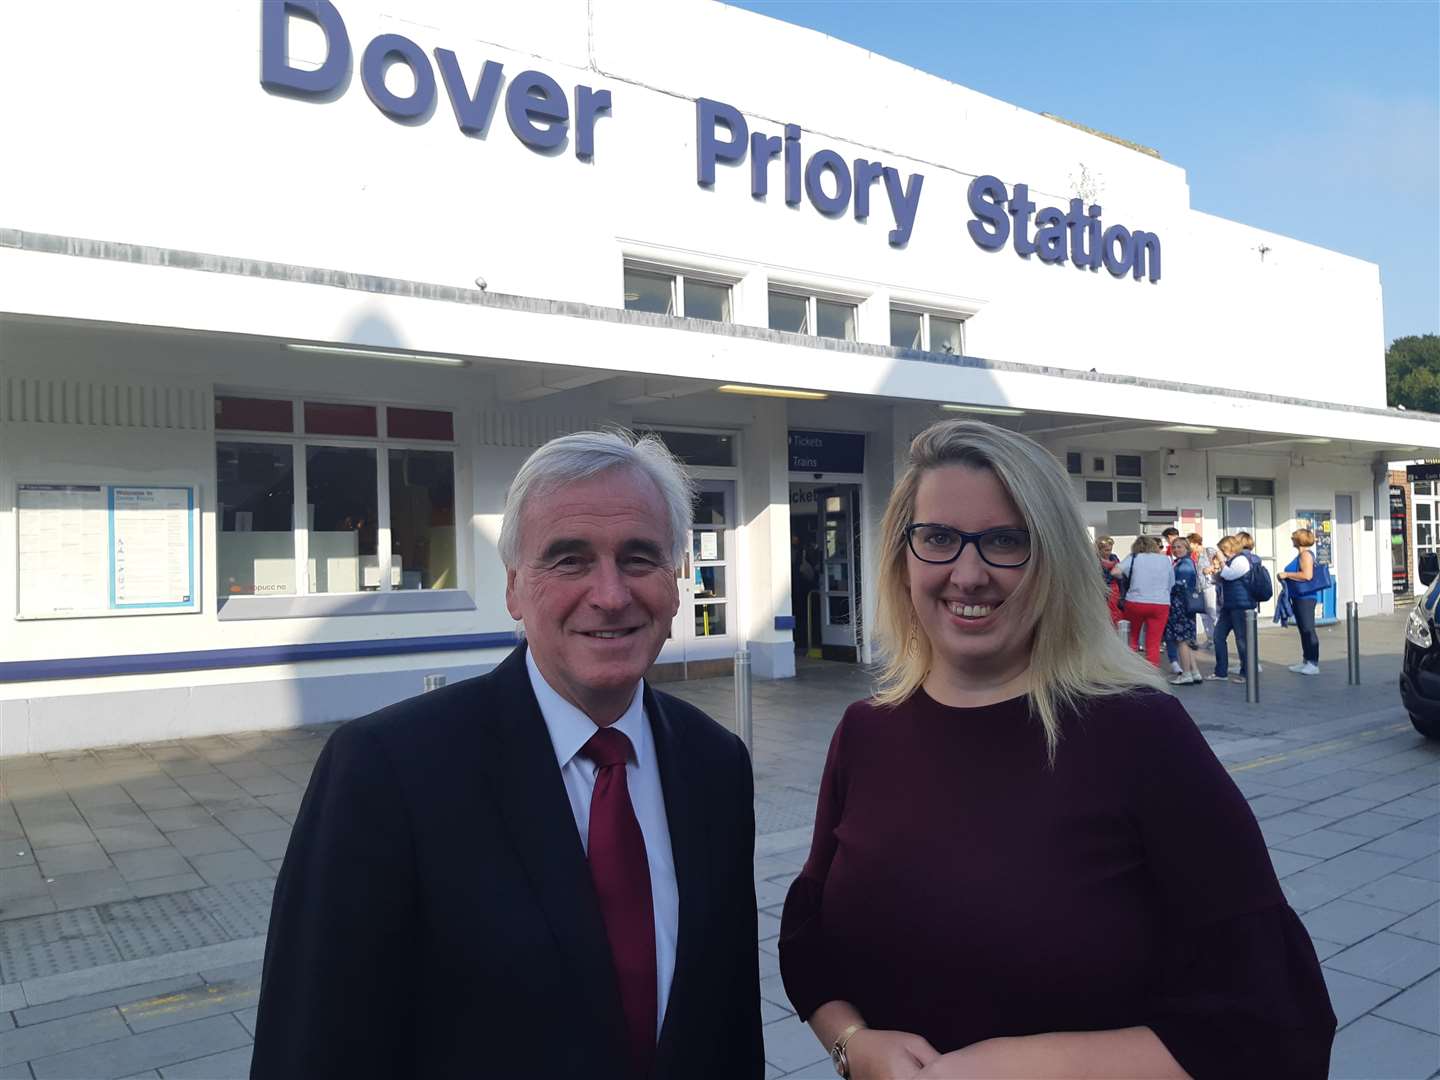 Shadow Chancellor John McDonnell with Charlotte Cornell, Labour prospective parliamentary candidate for Dover